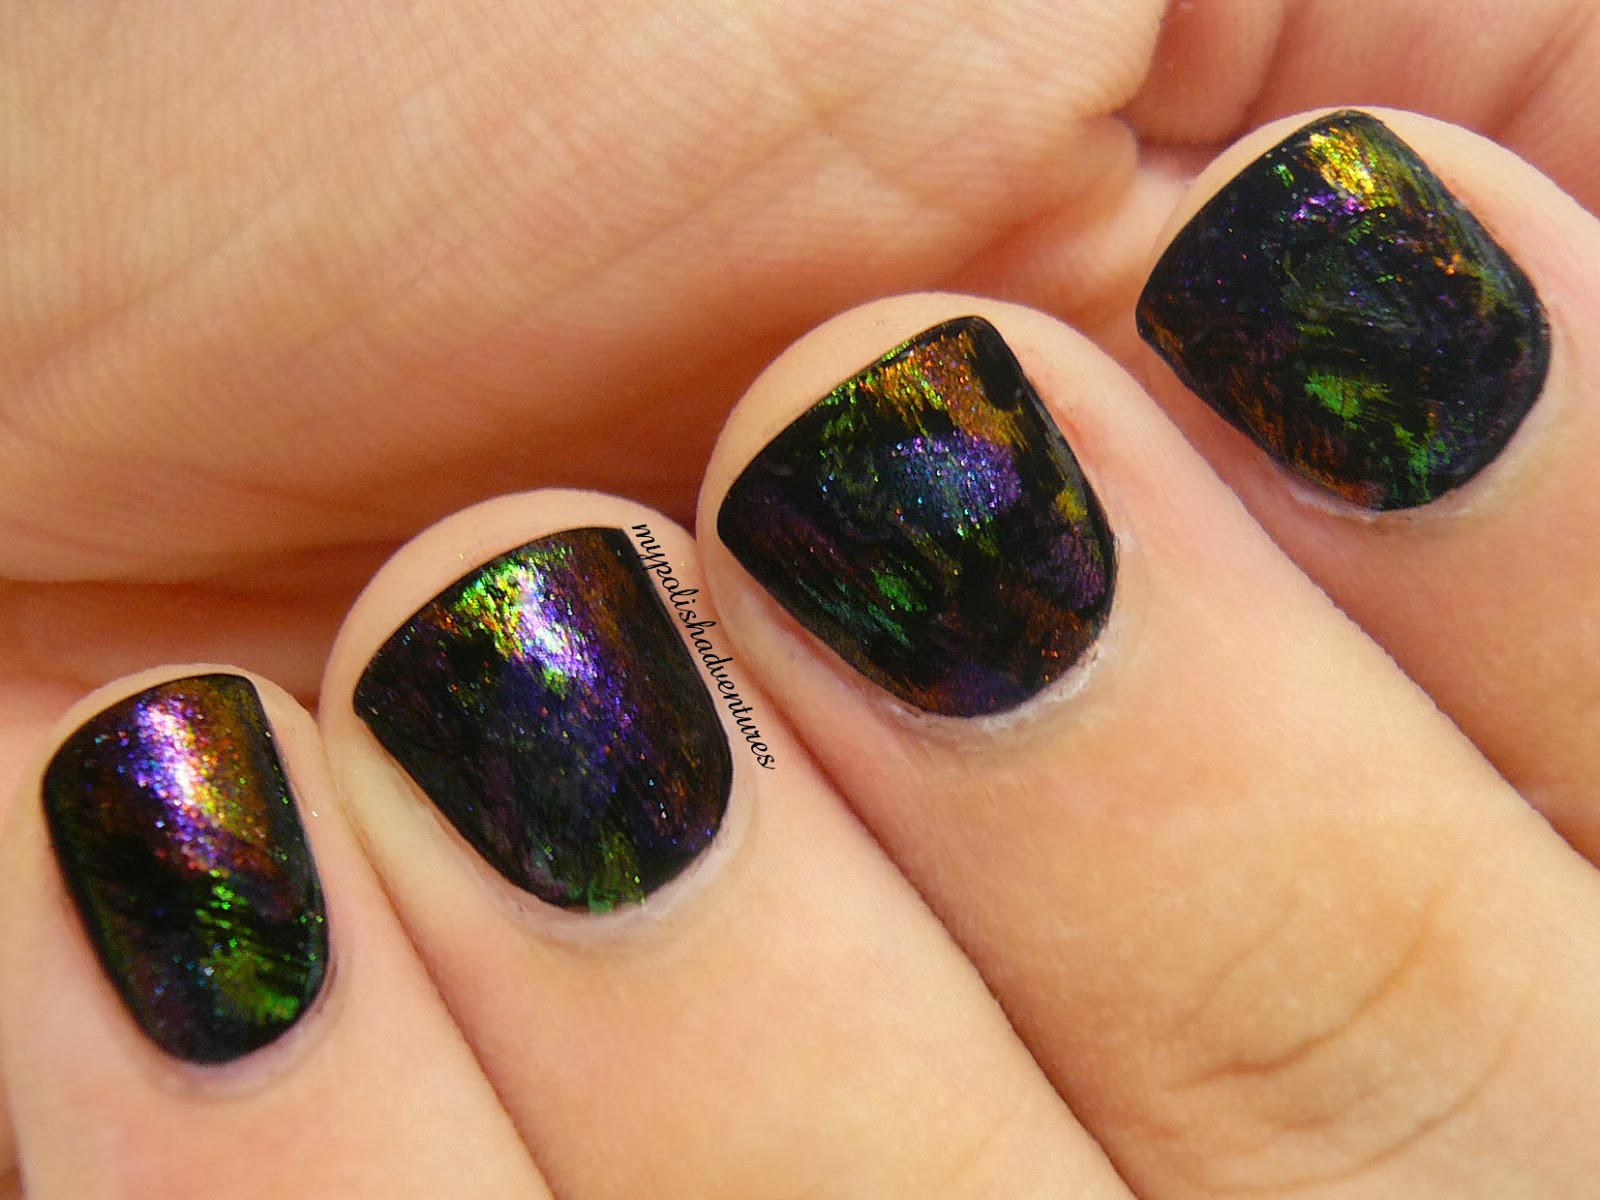 10. "Oil Spill" Nail Art: The Perfect Look for Any Occasion - wide 8